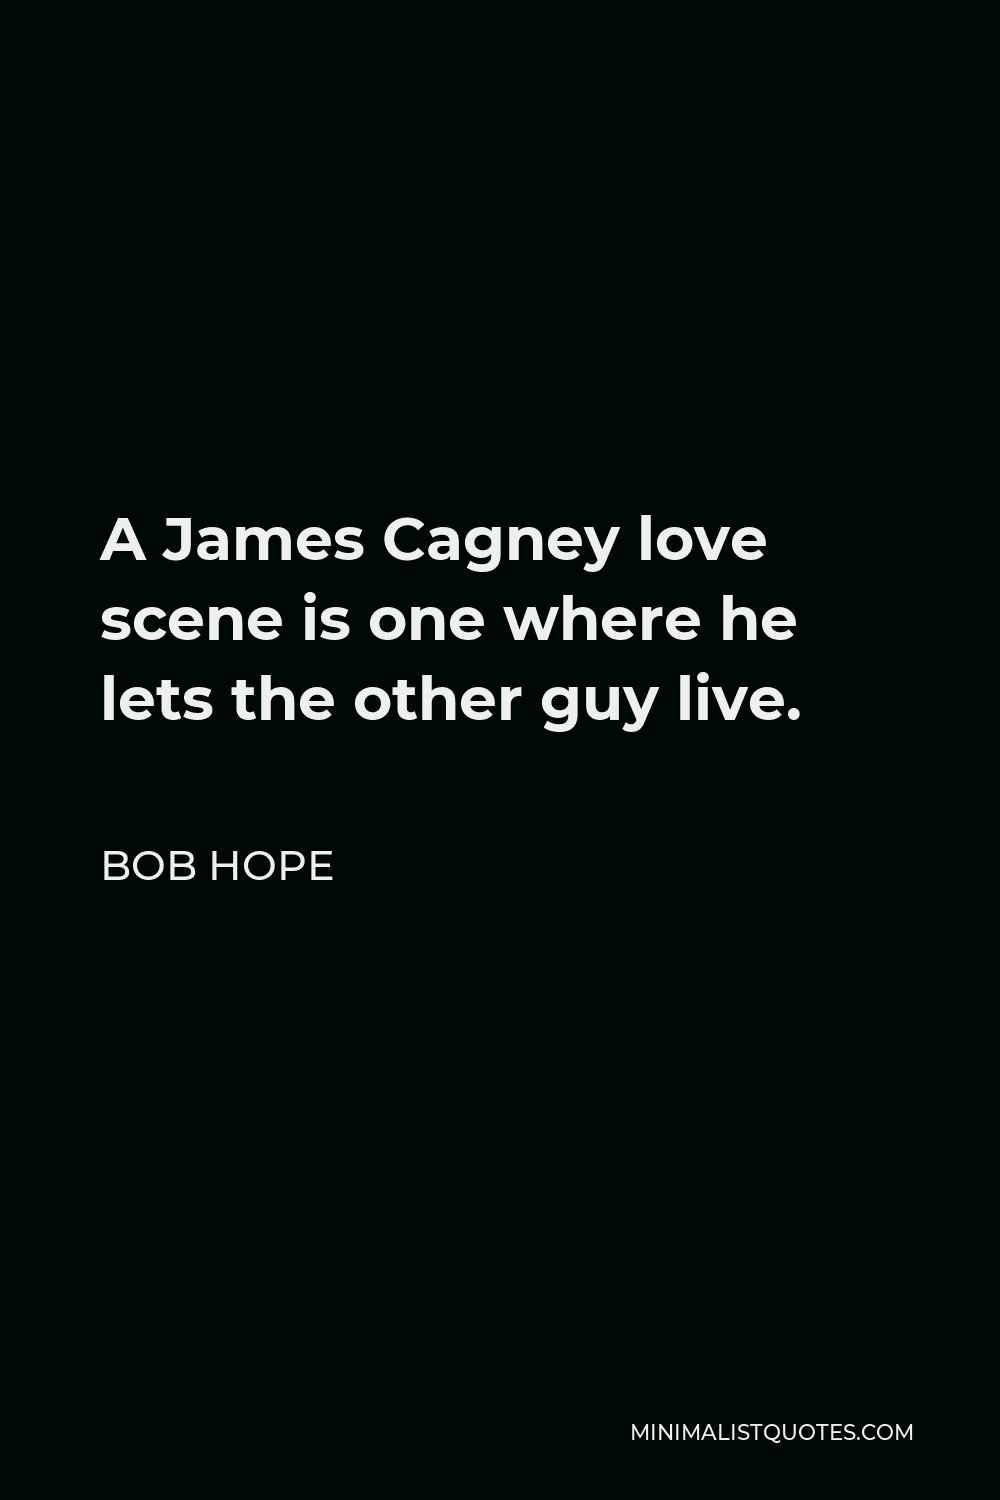 Bob Hope Quote - A James Cagney love scene is one where he lets the other guy live.